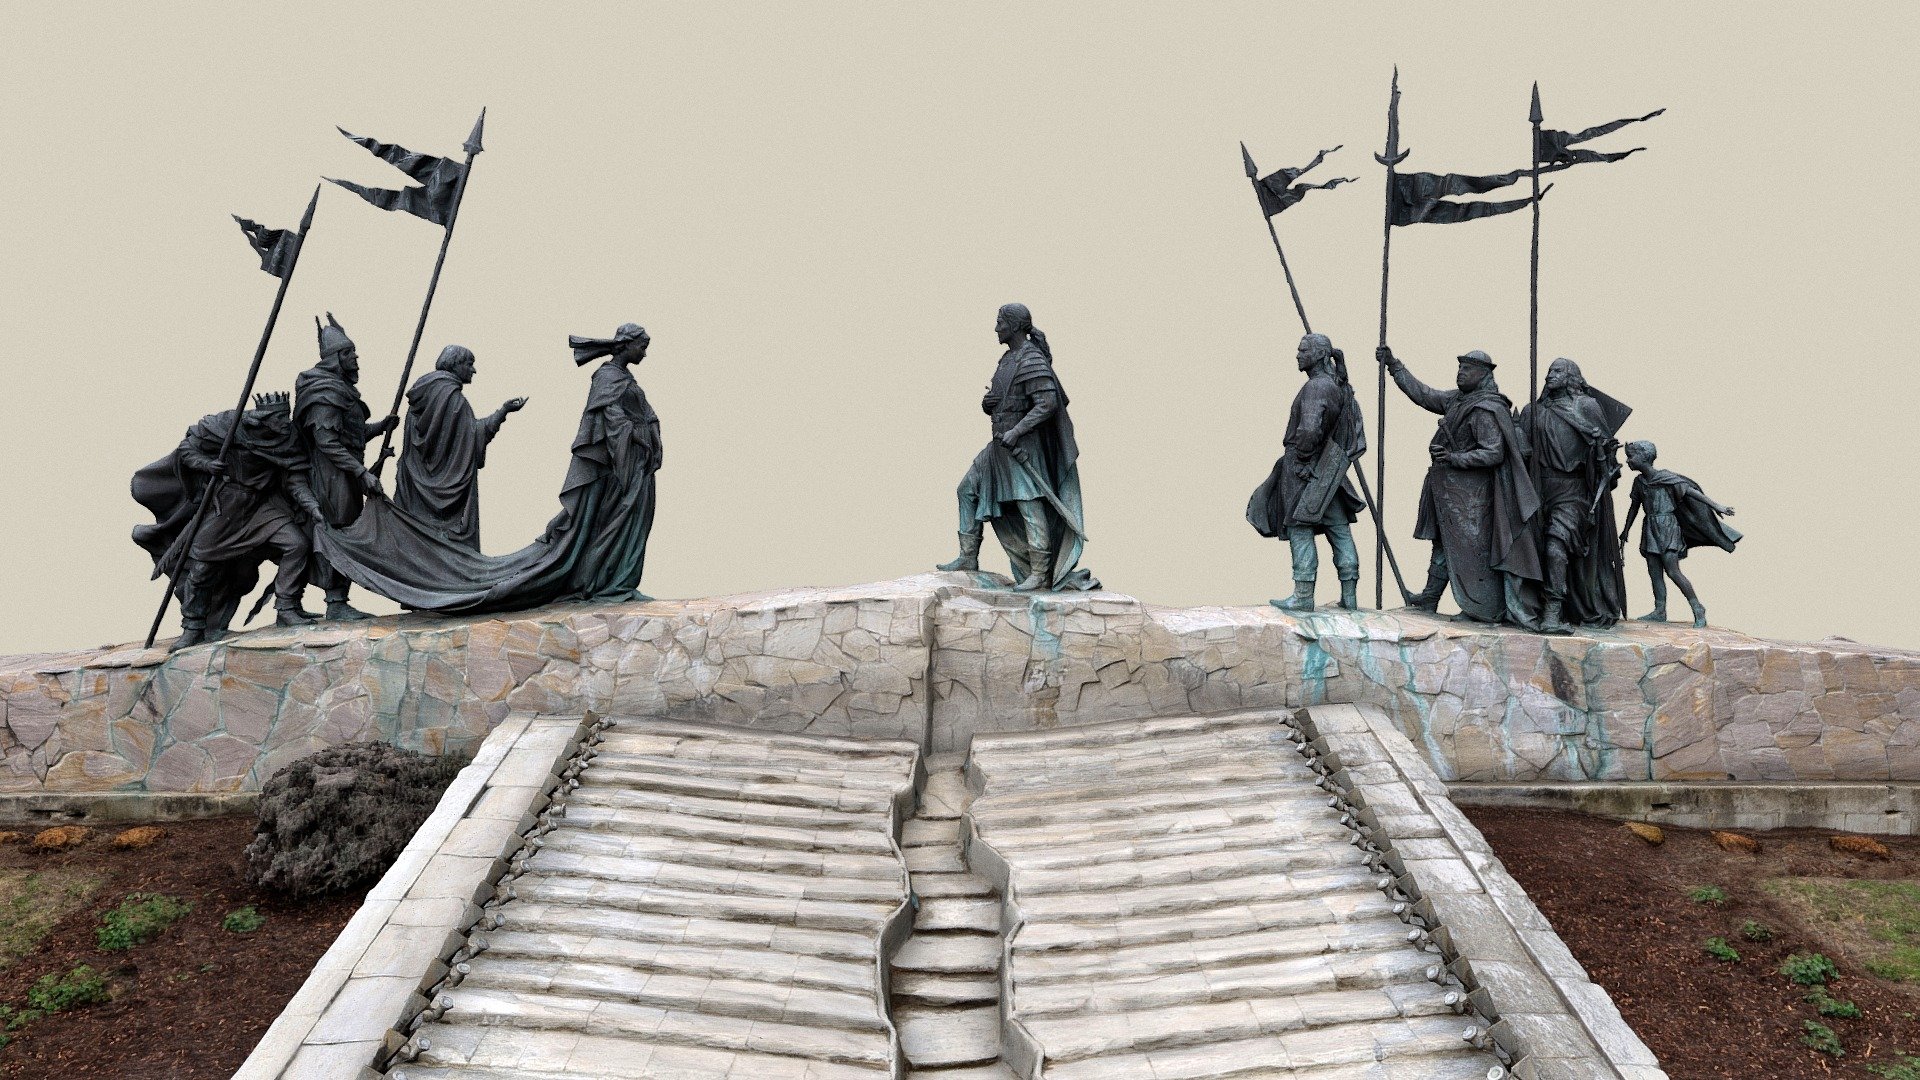 3D model of the Nibelung Fountain in Tulln an der Donau. In the saga of the Nibelungs, written around 1200, a meeting of Kriemhild of the Burgundian kings with the Hun king Etzel in Tulln an der Donau is described. This monument was erected in 2005 to mark the occasion. The figures are by Michail Nogin, the fountain by Hans Muhr. The group on the left comprises two princes wearing trains, Margrave Rüdiger of Bechelaren and Kriemhild, those on the right King Etzel (Attila), his brother Bleda and the kings Dietrich of Bern and Gibich as well as Attila's son. In the summer months, the water fountains form an open book 3d model